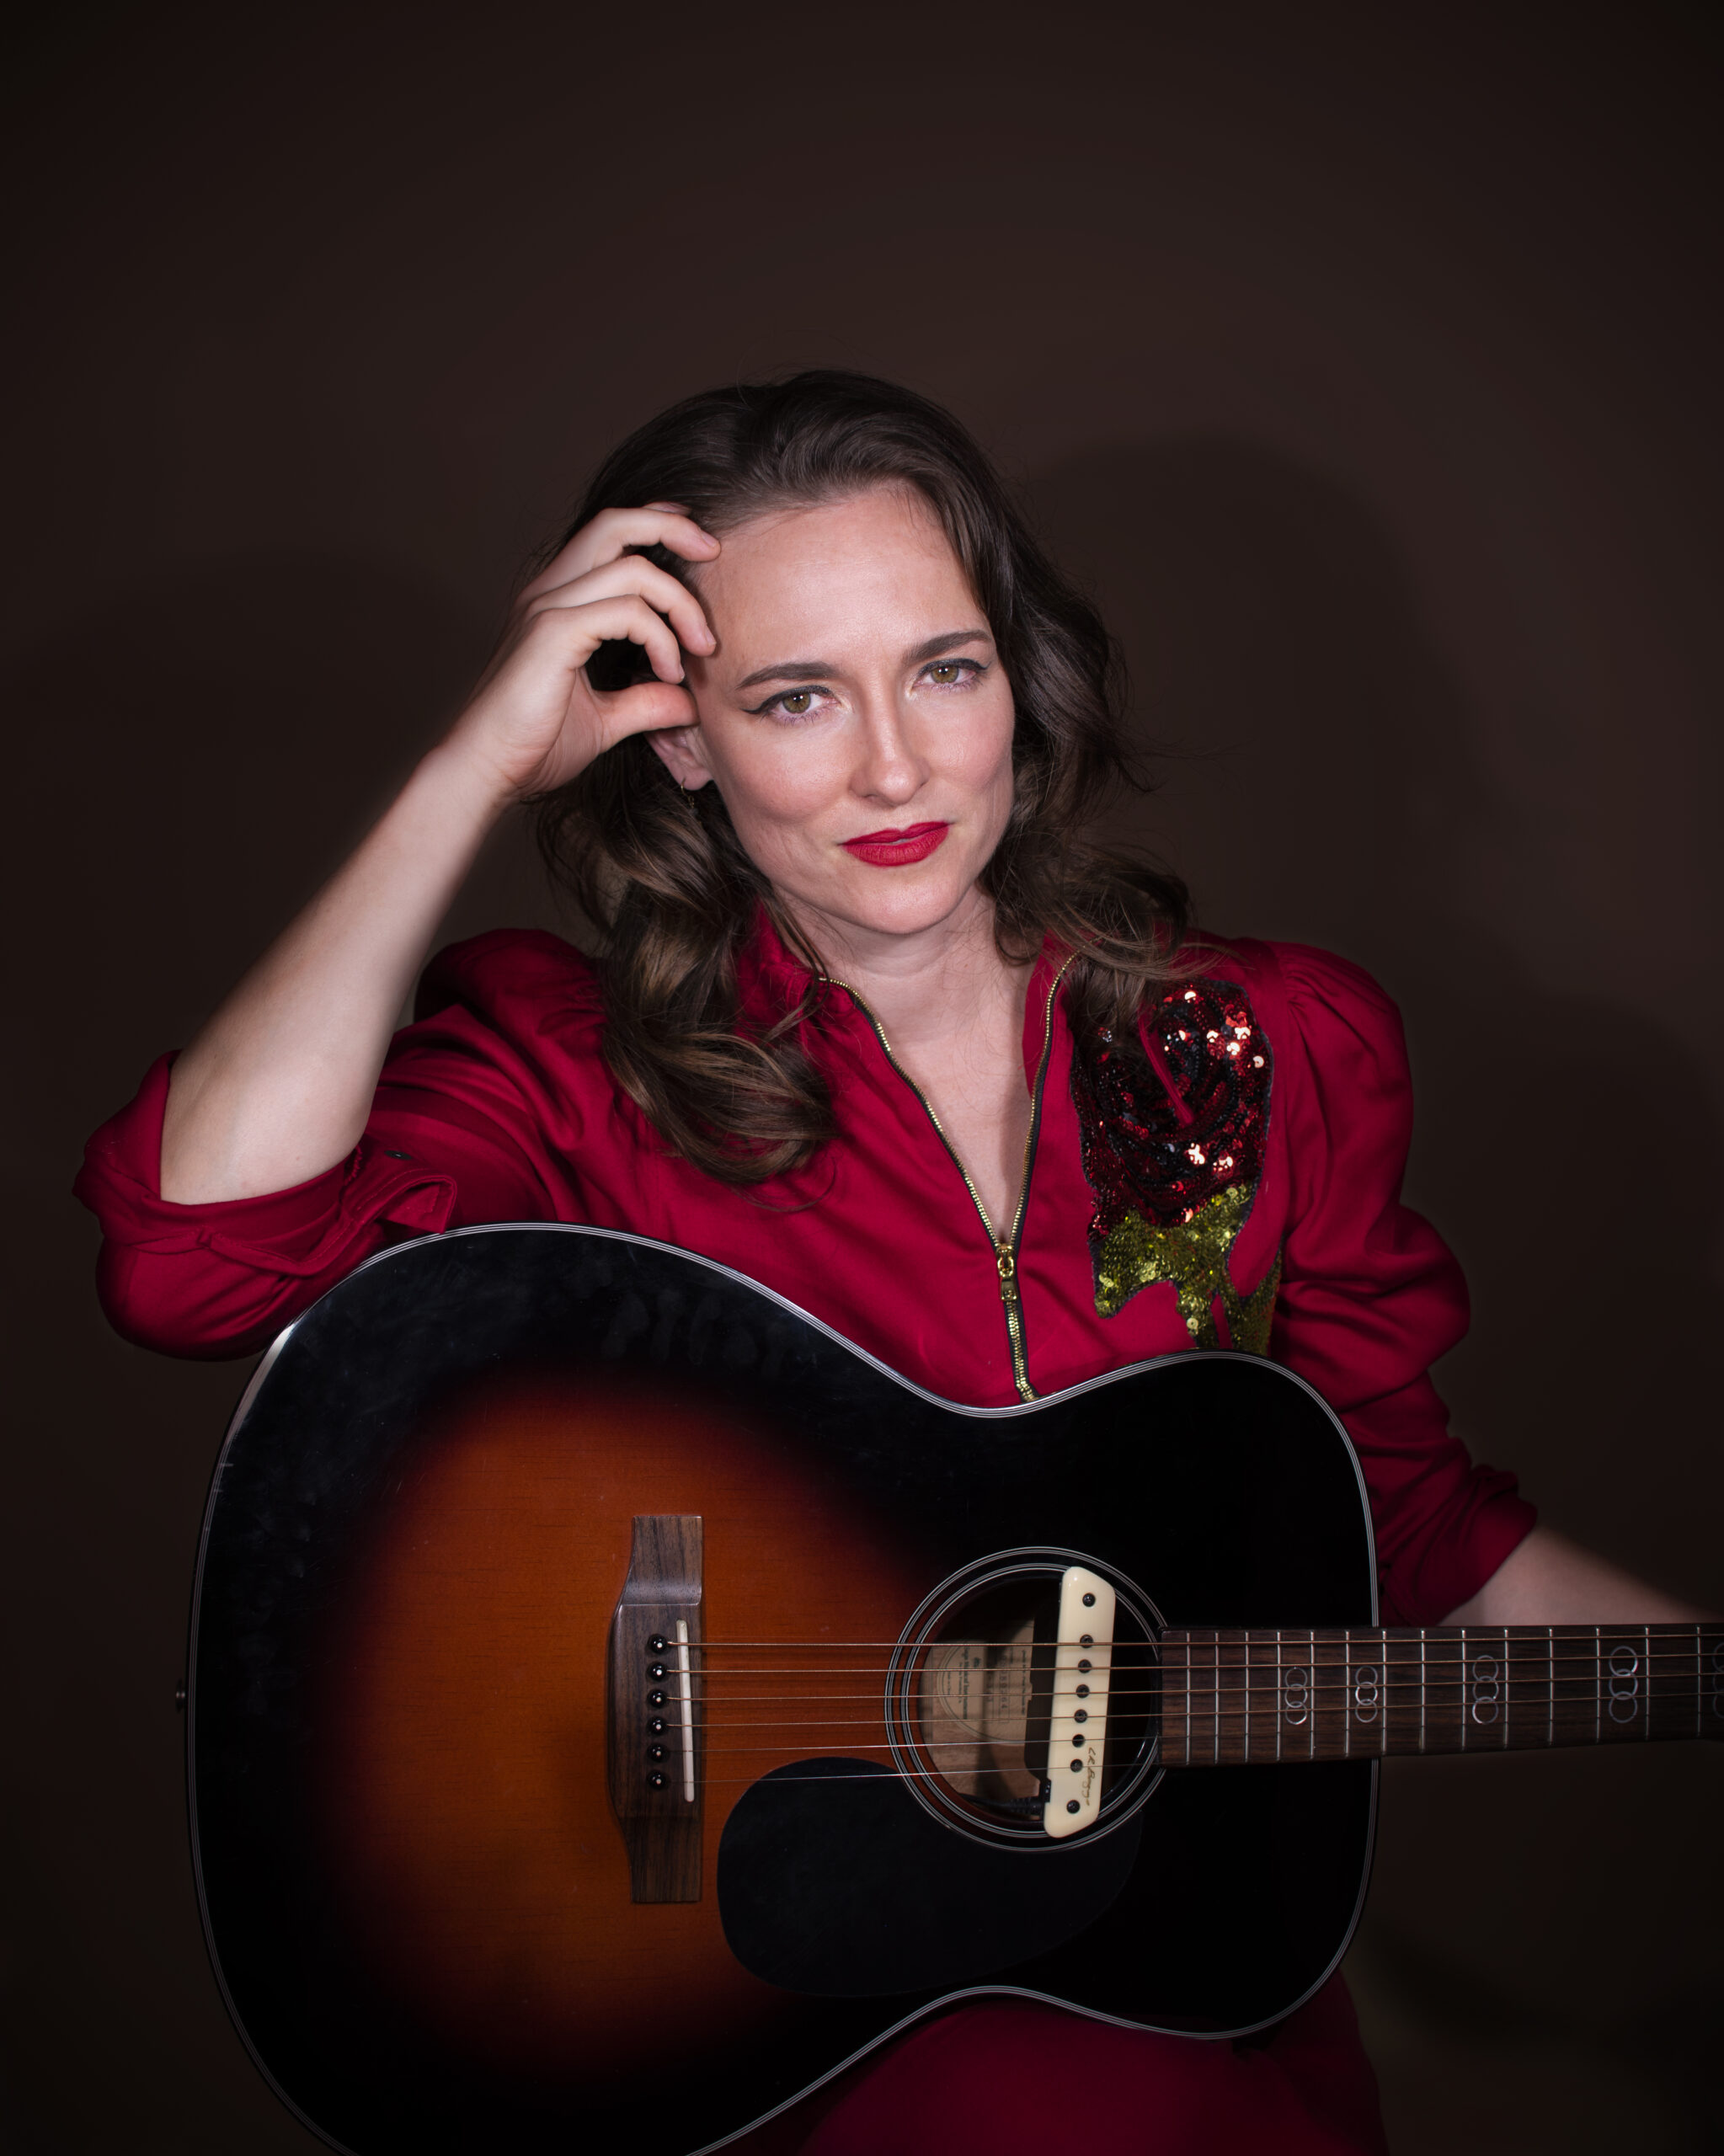 Headshot of a woman in a red blouse with dark hair and red lipstick holding a guitar